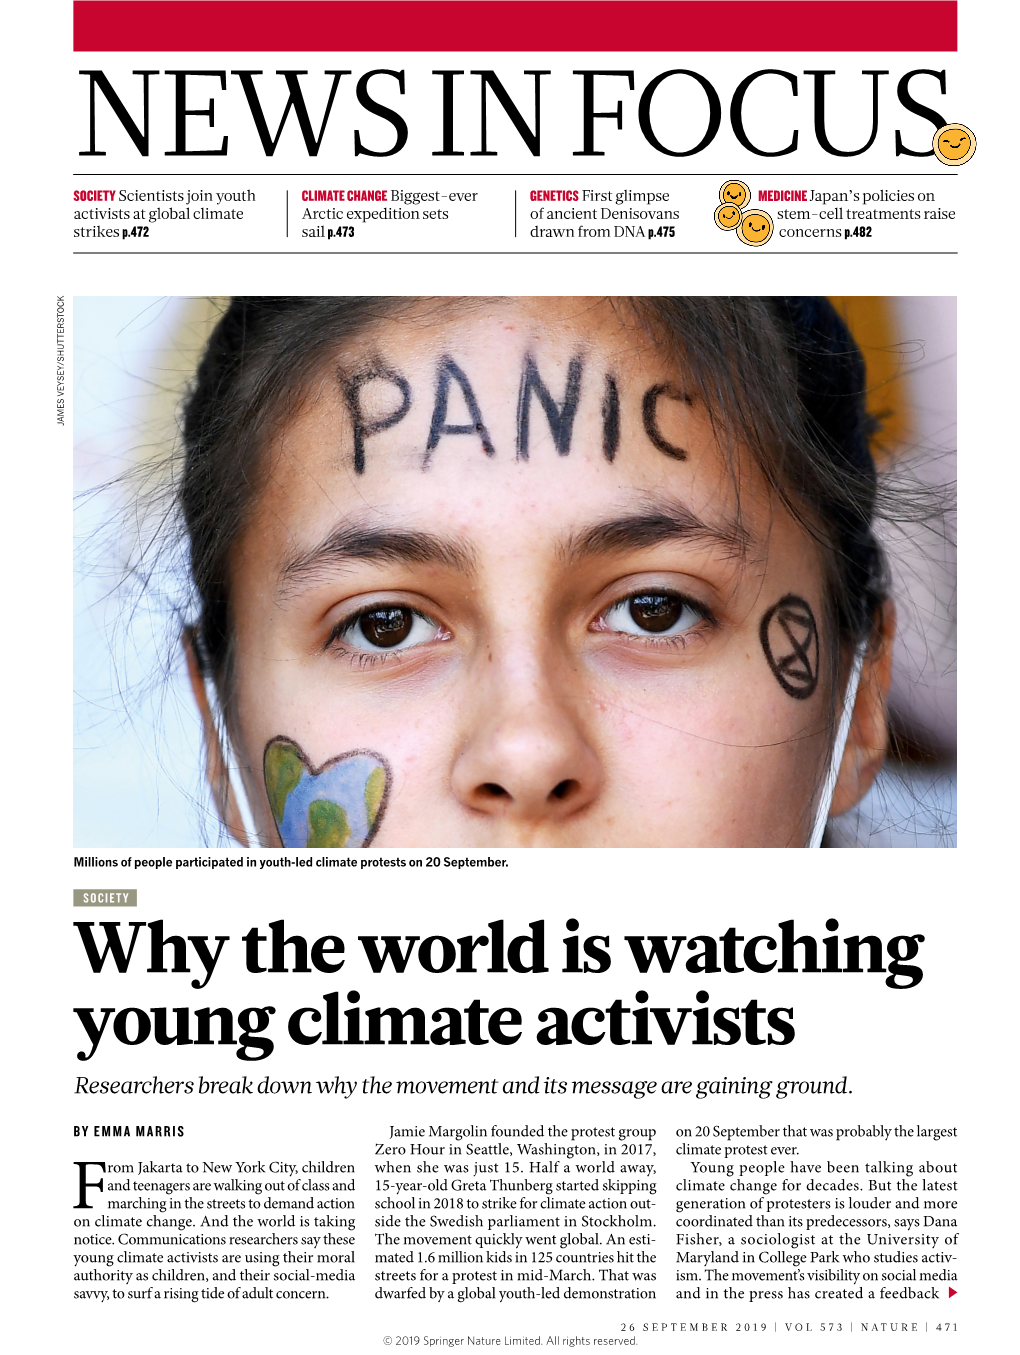 Why the World Is Watching Young Climate Activists Researchers Break Down Why the Movement and Its Message Are Gaining Ground